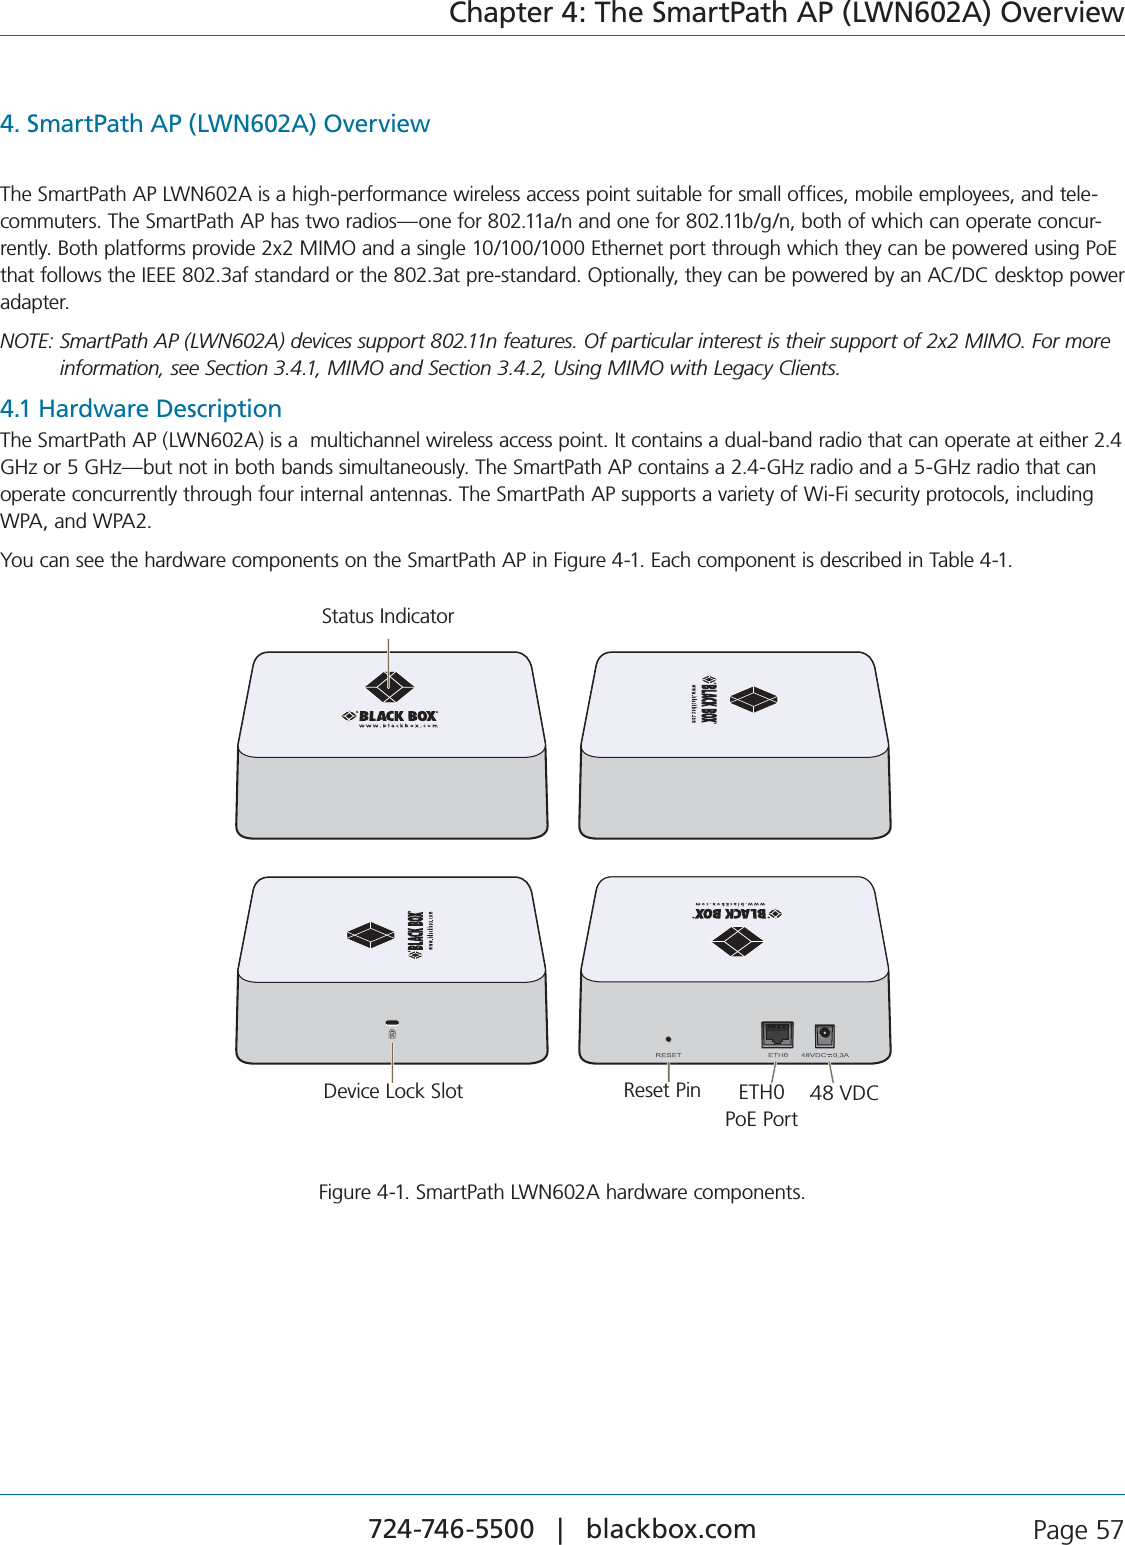 724-746-5500   |   blackbox.com  Page 57Chapter 4: The SmartPath AP (LWN602A) Overview4. SmartPath AP (LWN602A) OverviewThe SmartPath AP LWN602A is a high-performance wireless access point suitable for small offices, mobile employees, and tele-COMMUTERS4HE3MART0ATH!0HASTWORADIOSONEFORANANDONEFORBGNBOTHOFWHICHCANOPERATECONCUR-RENTLY&quot;OTHPLATFORMSPROVIDEX-)-/ANDASINGLE%THERNETPORTTHROUGHWHICHTHEYCANBEPOWEREDUSING0O%THATFOLLOWSTHE)%%%AFSTANDARDORTHEATPRESTANDARD/PTIONALLYTHEYCANBEPOWEREDBYAN!#$#DESKTOPPOWERadapter.NOTE:  SmartPath AP (LWN602A) devices support 802.11n features. Of particular interest is their support of 2x2 MIMO. For more information, see Section 3.4.1, MIMO and Section 3.4.2, Using MIMO with Legacy Clients.4.1 Hardware DescriptionThe SmartPath AP (LWN602A) is a  multichannel wireless access point. It contains a dual-band radio that can operate at either 2.4 GHz or 5 GHz—but not in both bands simultaneously. The SmartPath AP contains a 2.4-GHz radio and a 5-GHz radio that can operate concurrently through four internal antennas. The SmartPath AP supports a variety of Wi-Fi security protocols, including WPA, and WPA2.You can see the hardware components on the SmartPath AP in Figure 4-1. Each component is described in Table 4-1.Reset PinDevice Lock Slot ETH0PoE Port48 VDCStatus IndicatorStatus IndicatorDevice Lock Slot Reset Pin ETH0  PoE Port6$#Figure 4-1. SmartPath LWN602A hardware components.